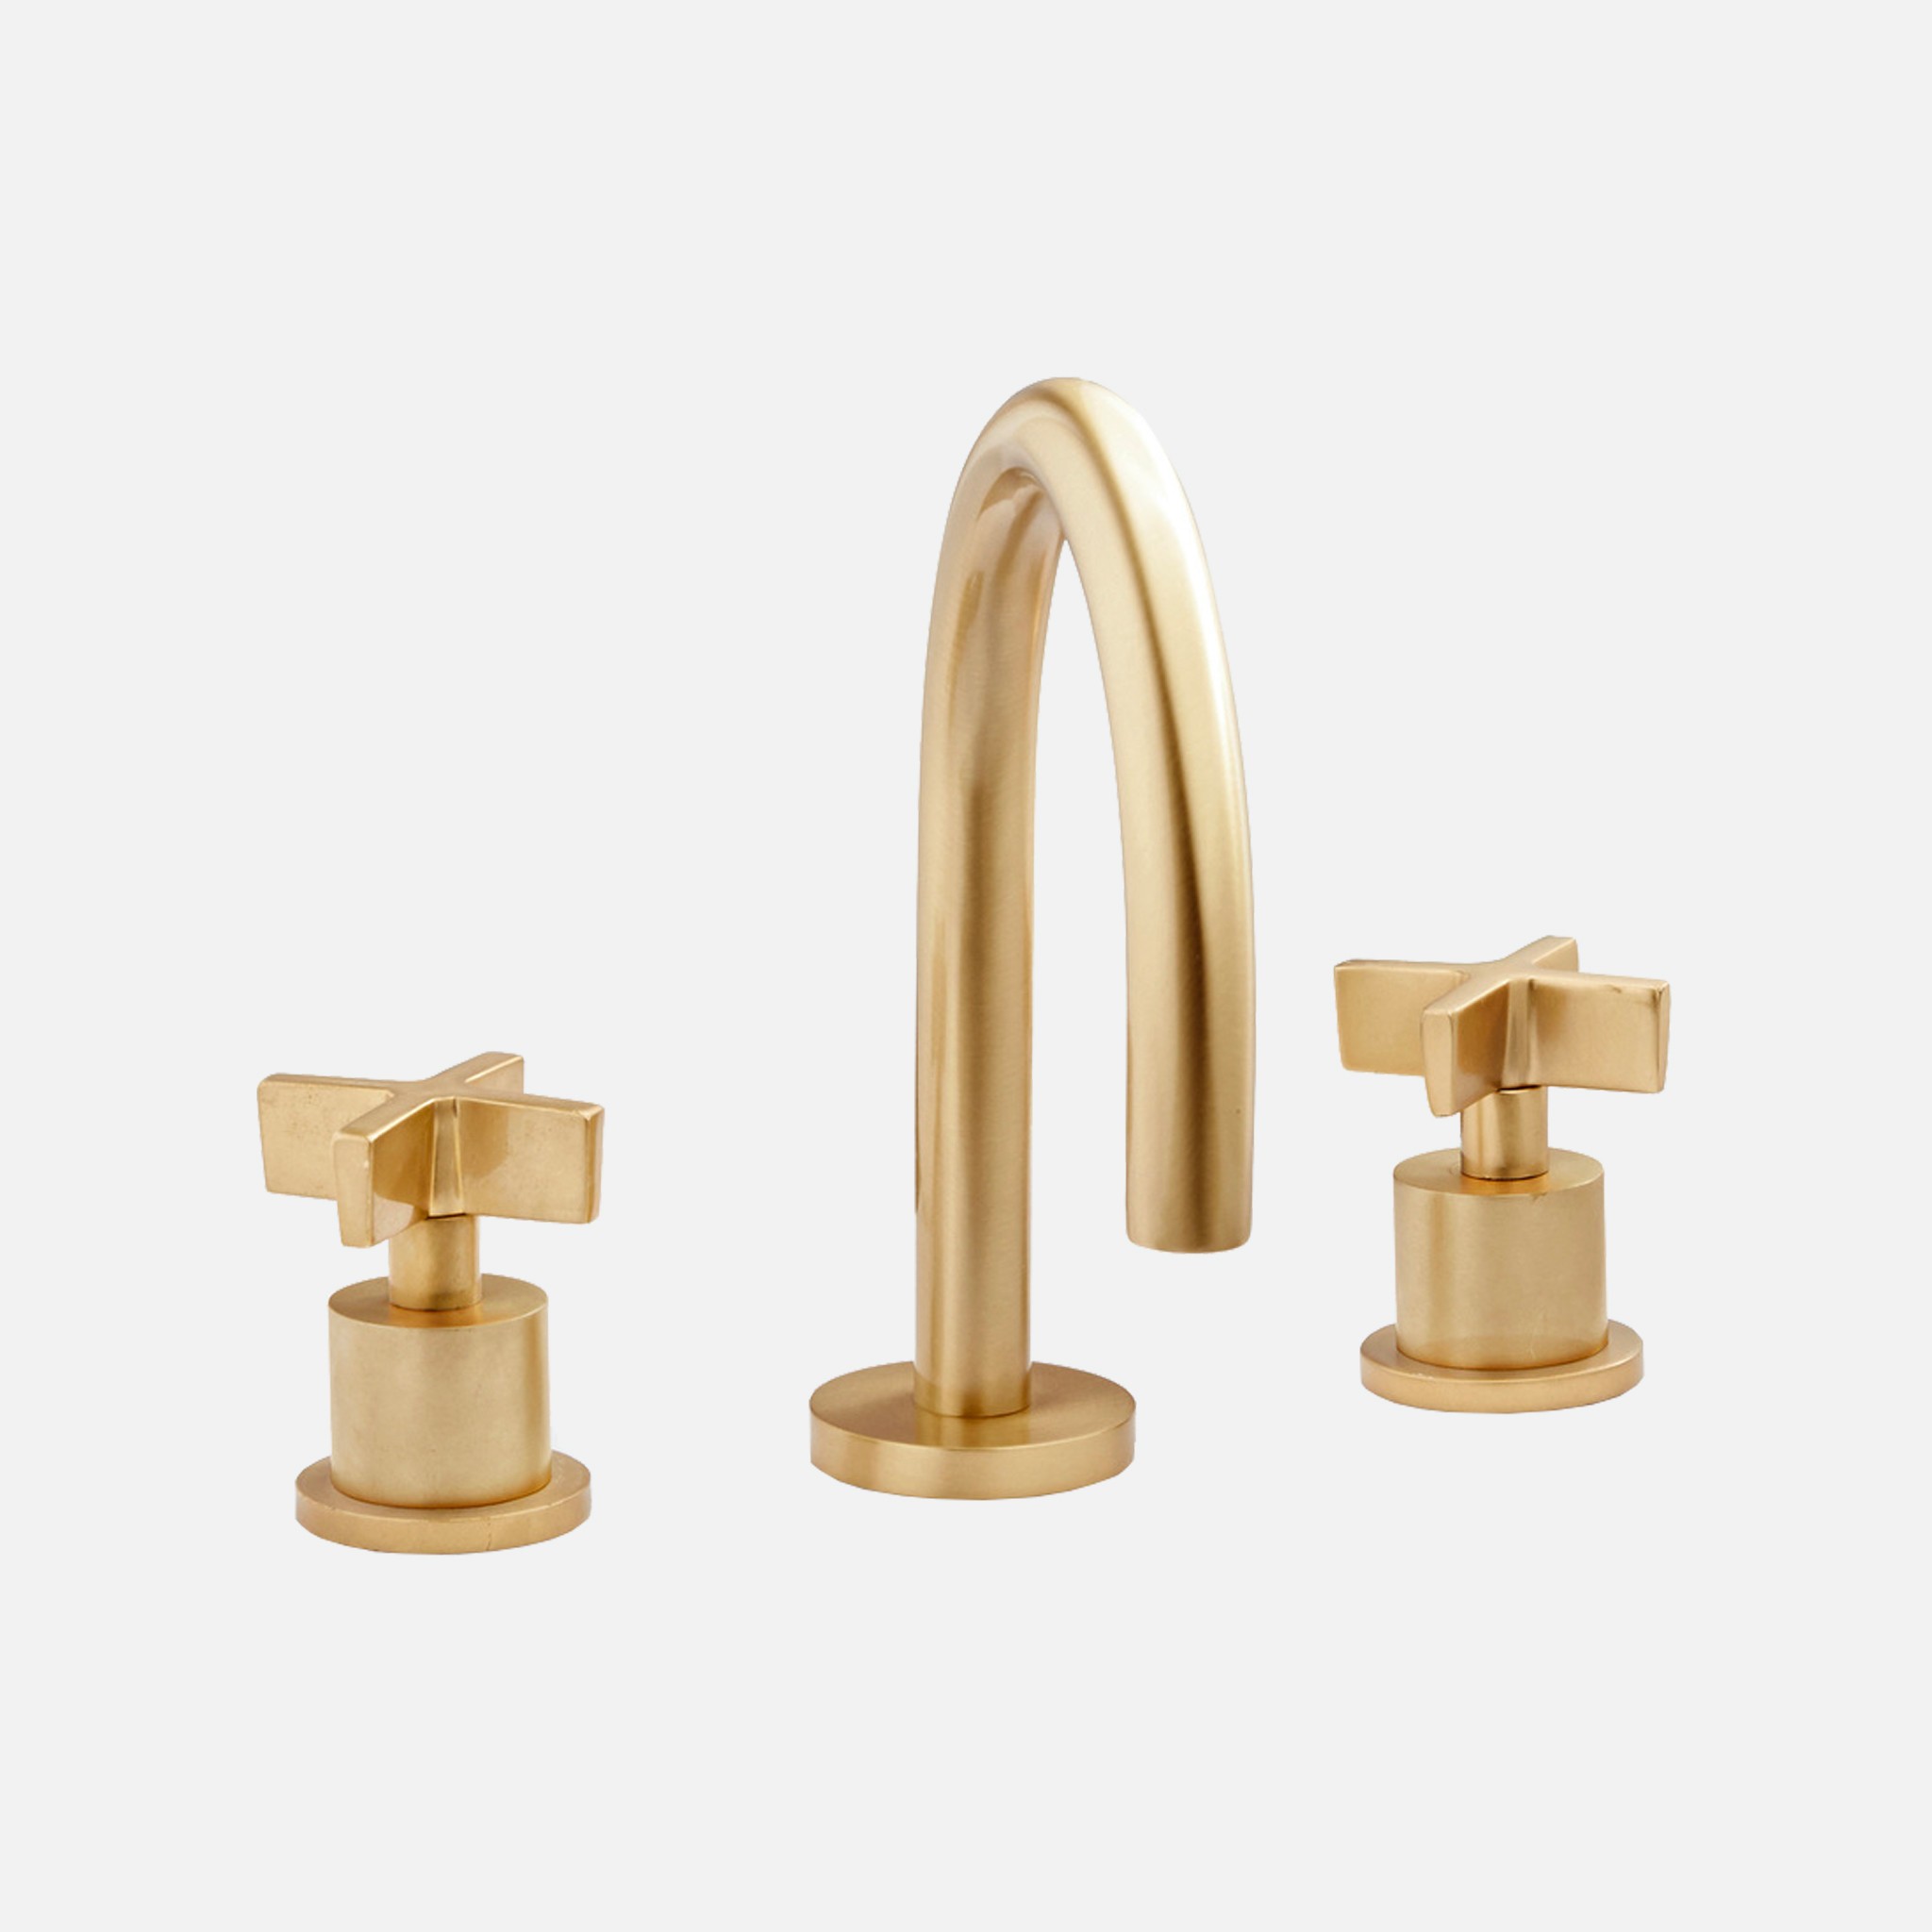 The image of an Rejuvenation's West Slope Bathroom Faucet product